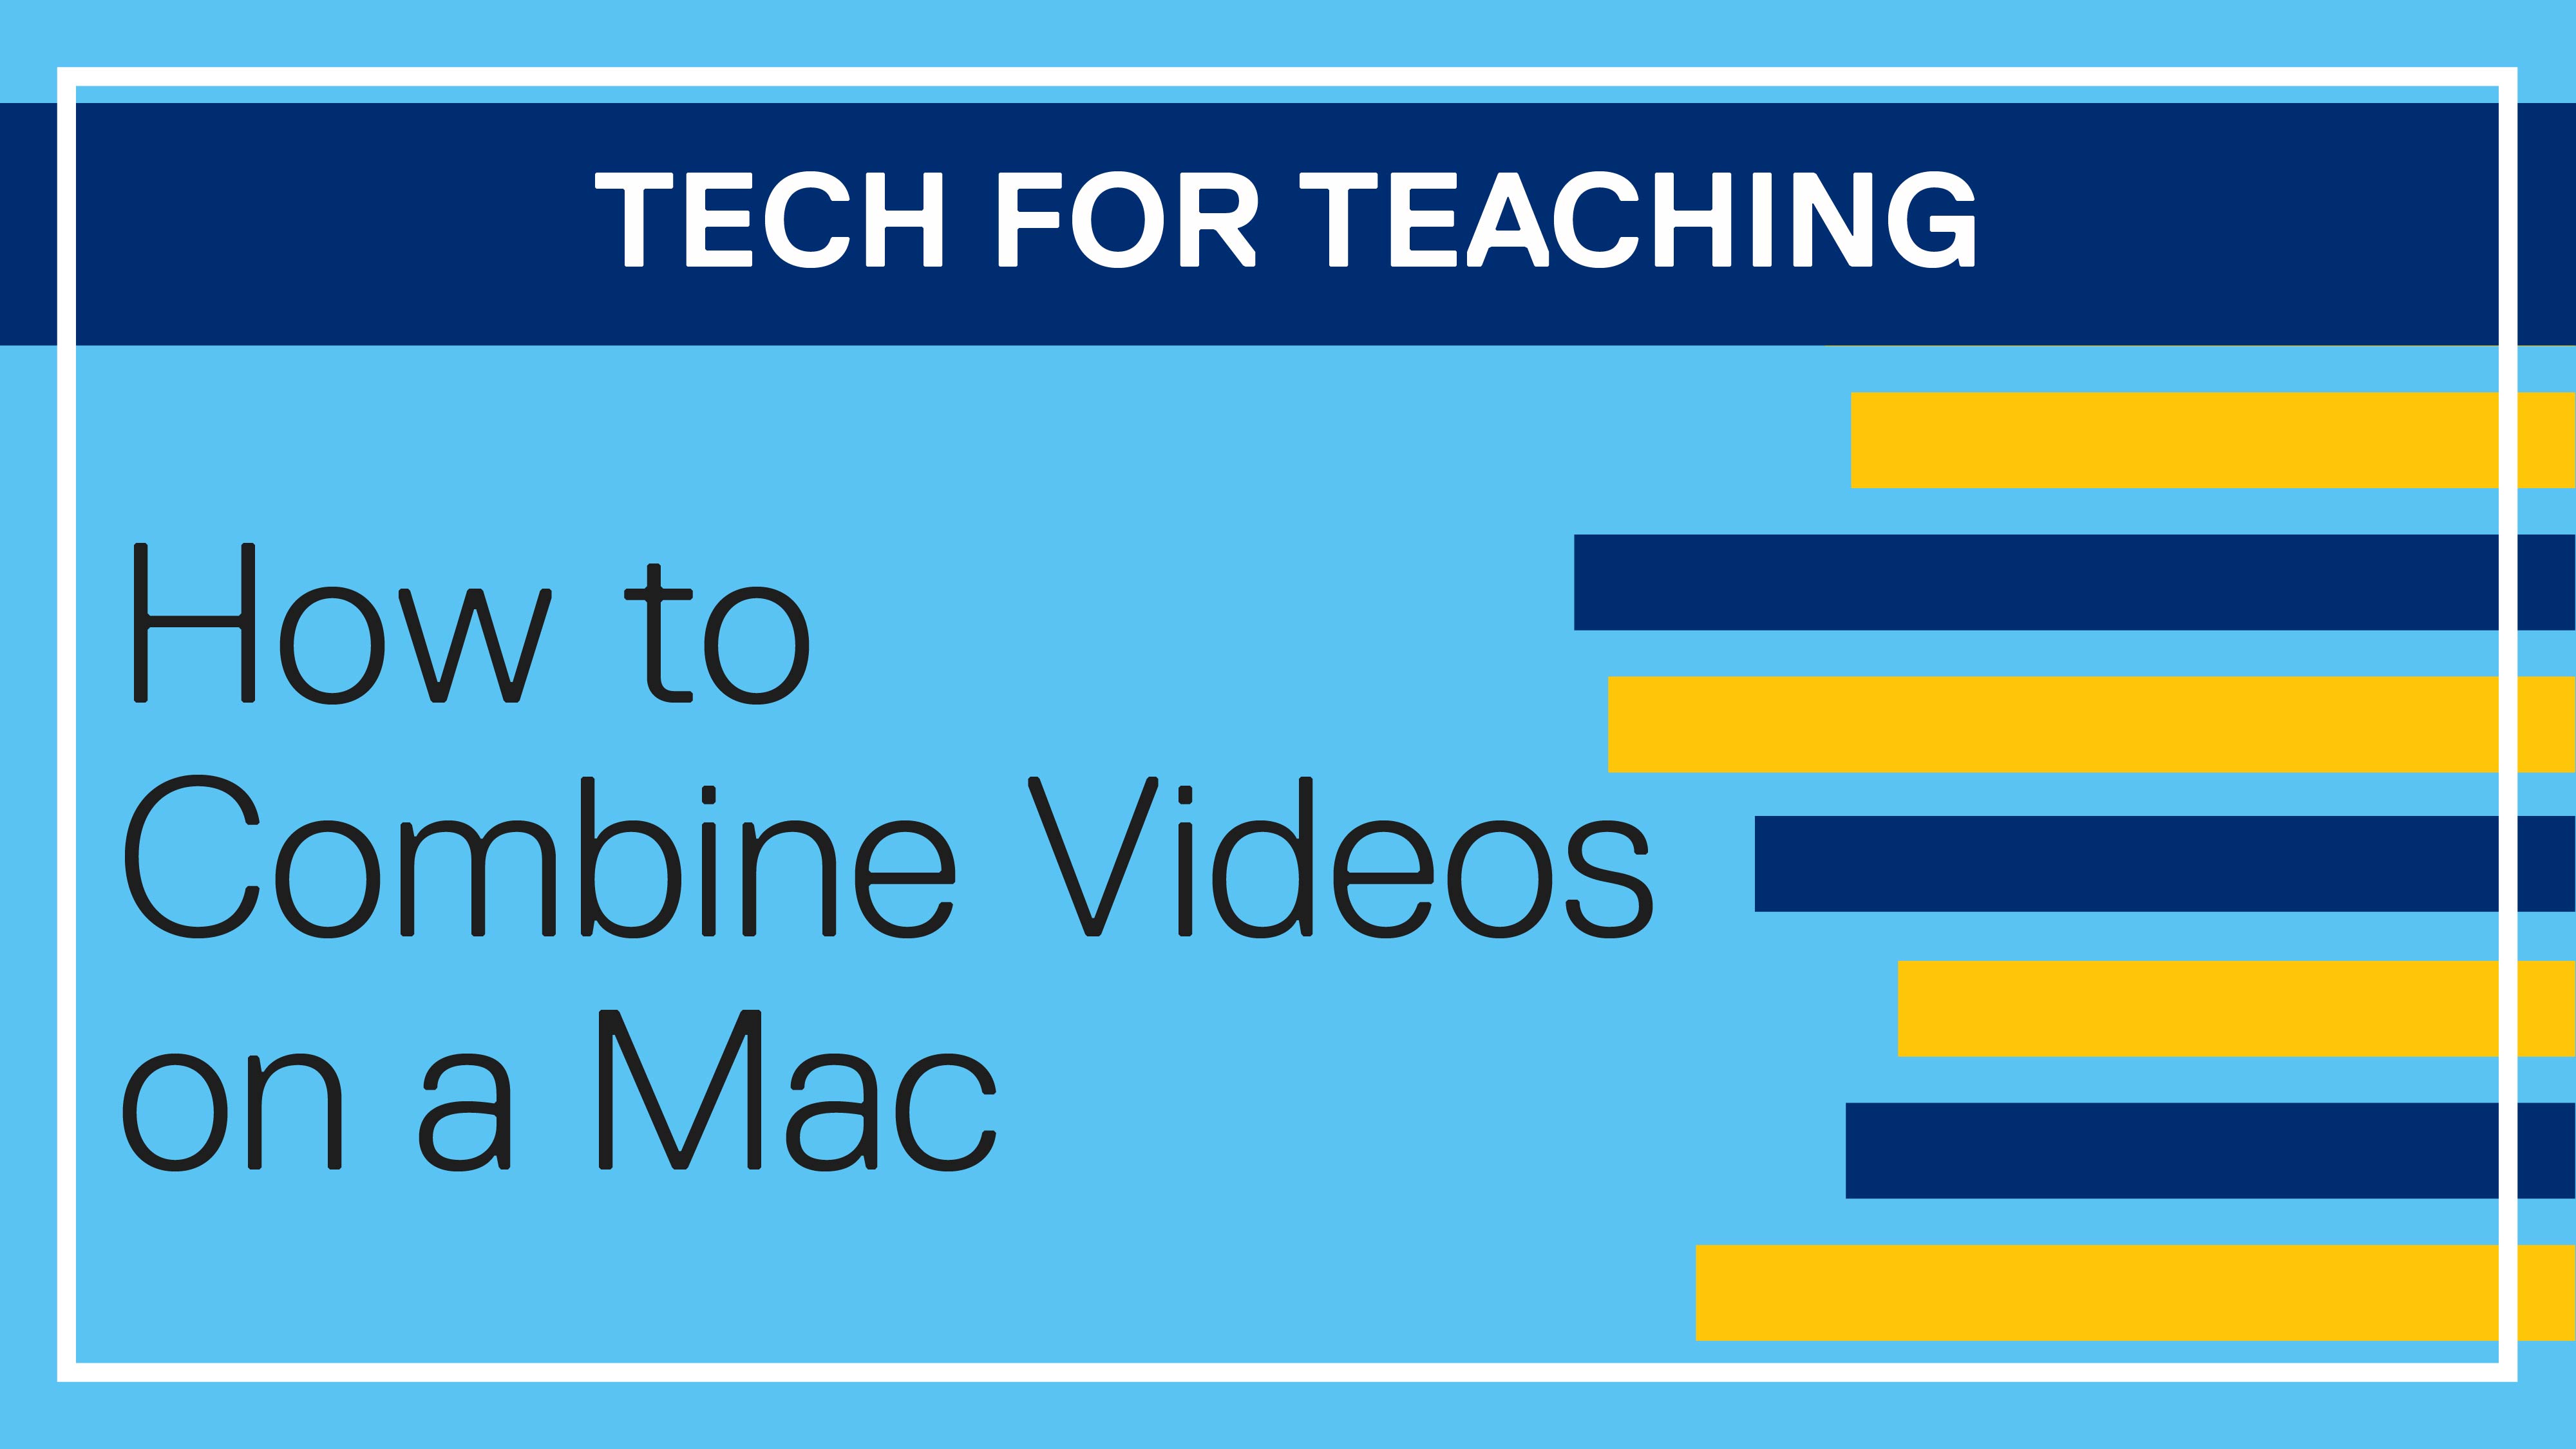 Tech for Teaching: How to Combine Videos on a Mac